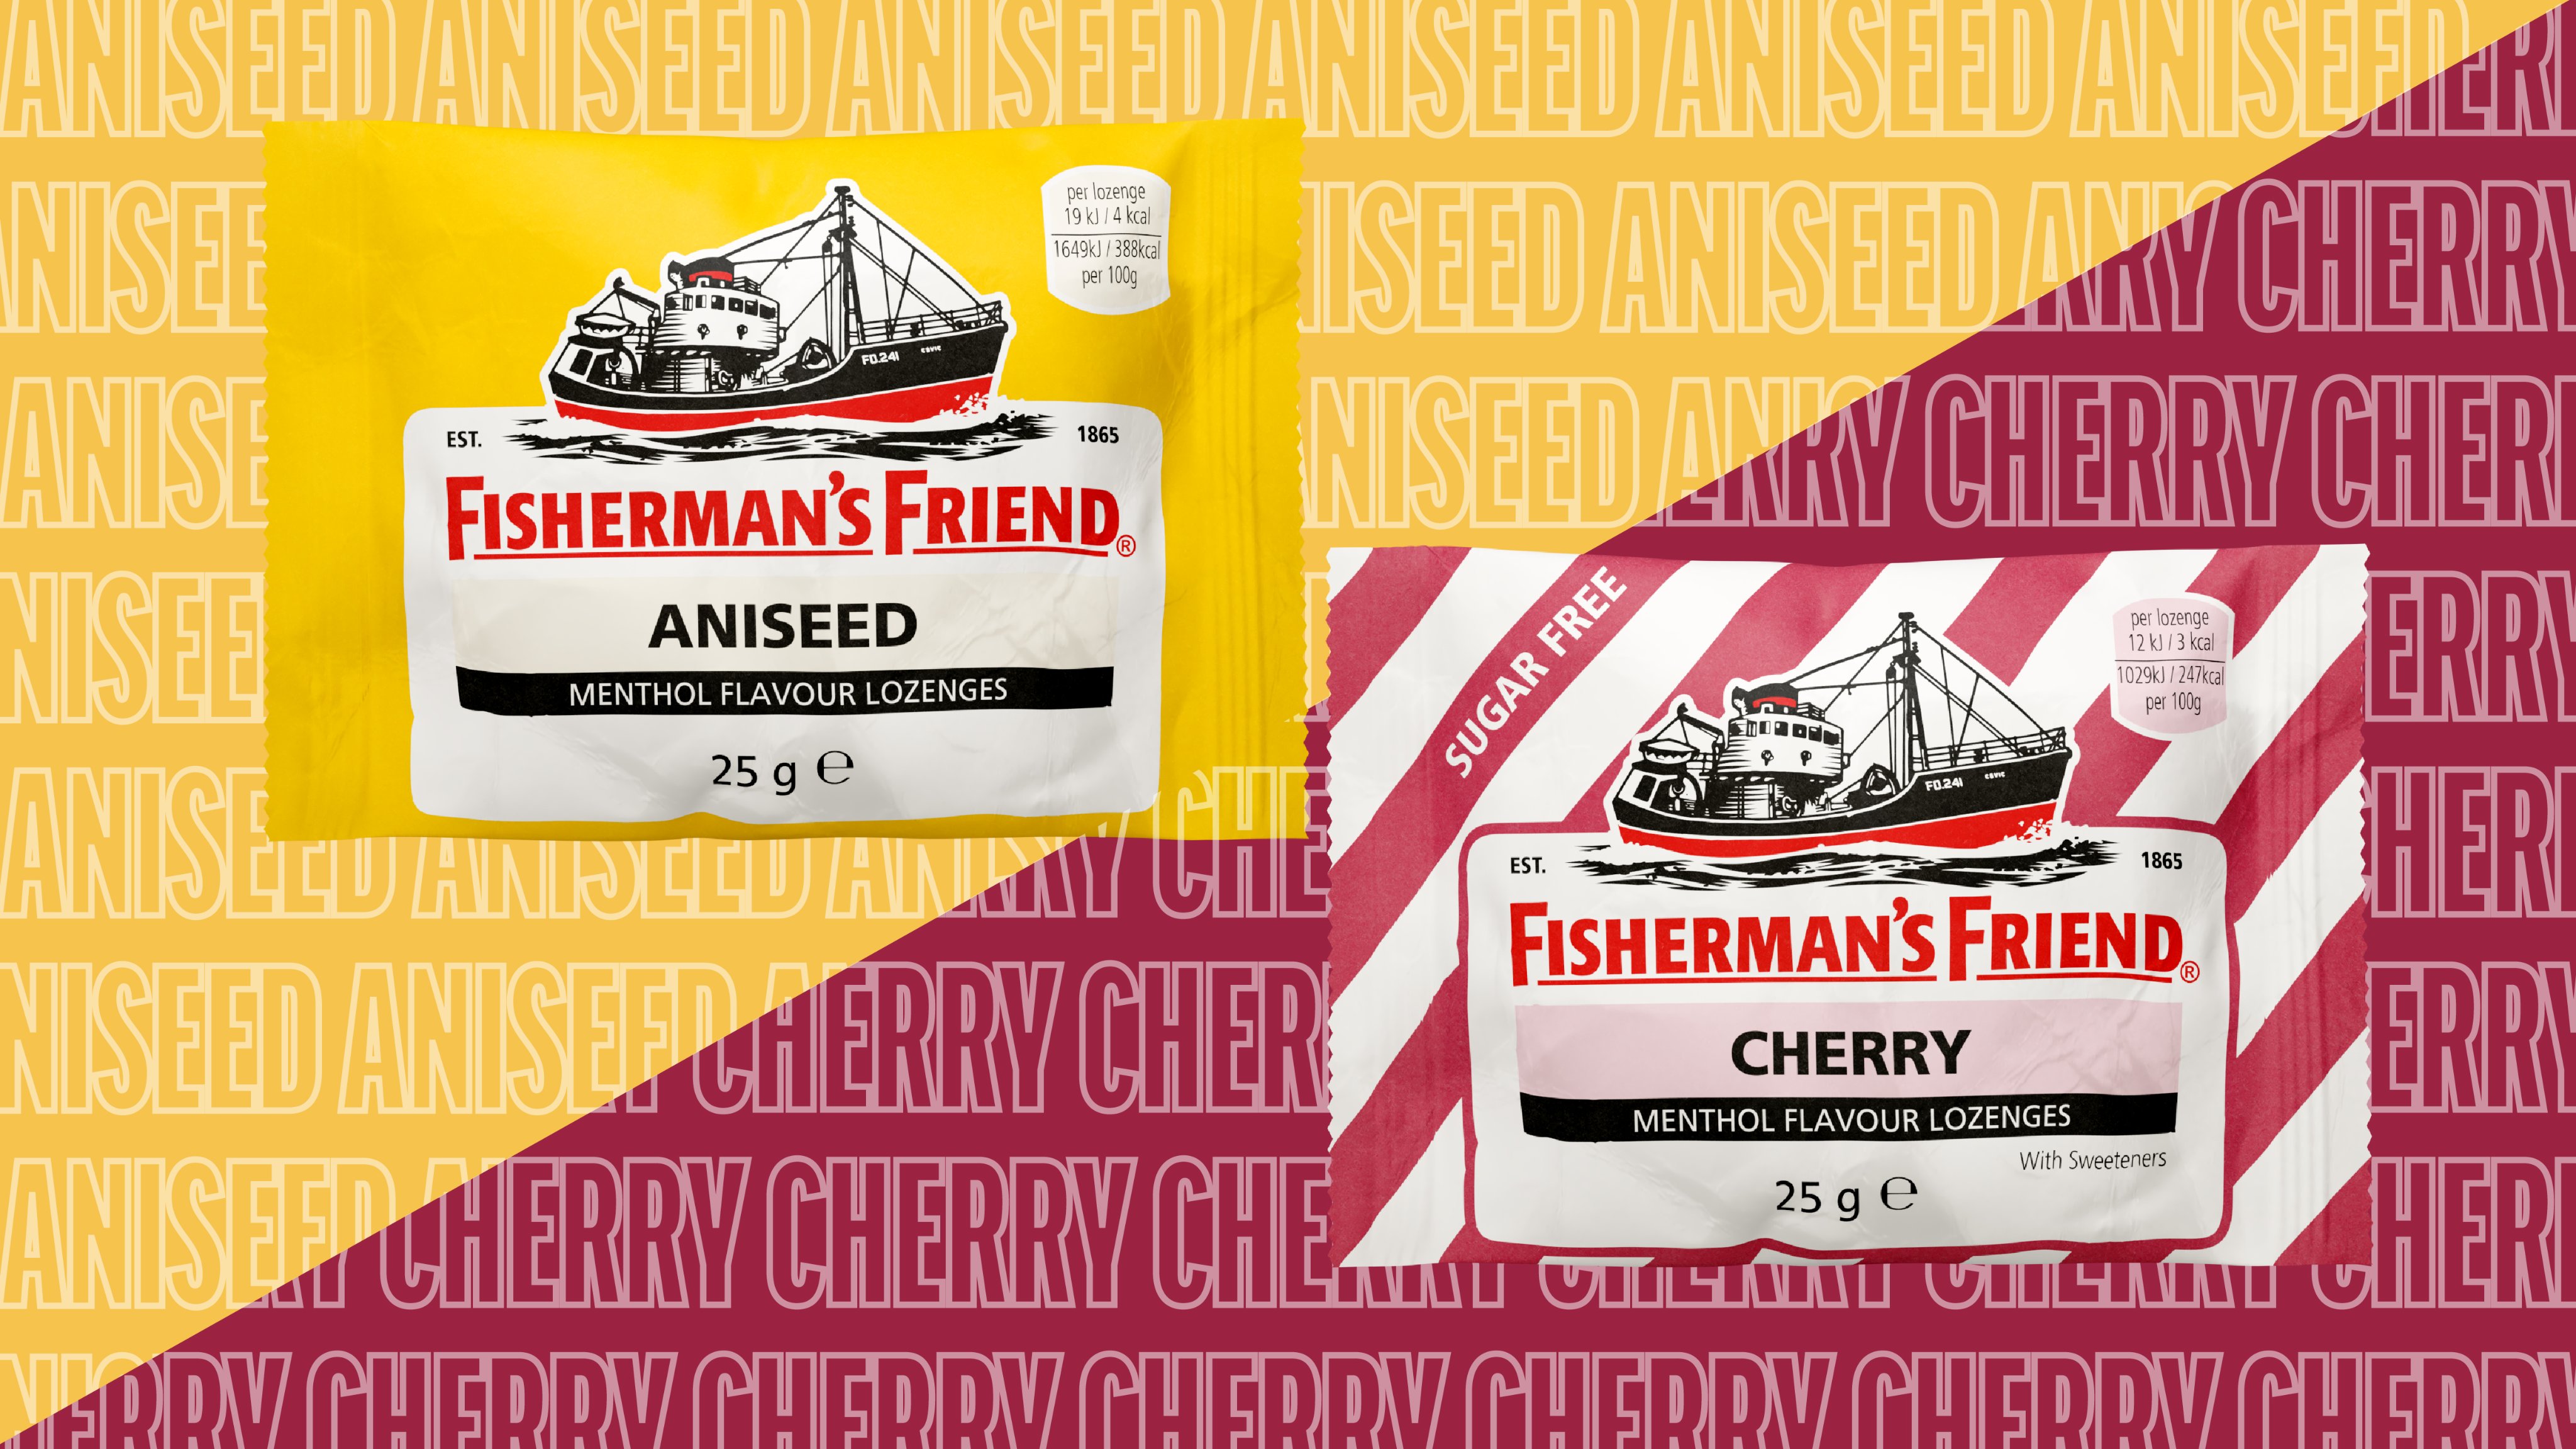 Didyouknow we have 10 flavours - Fisherman's Friend UK